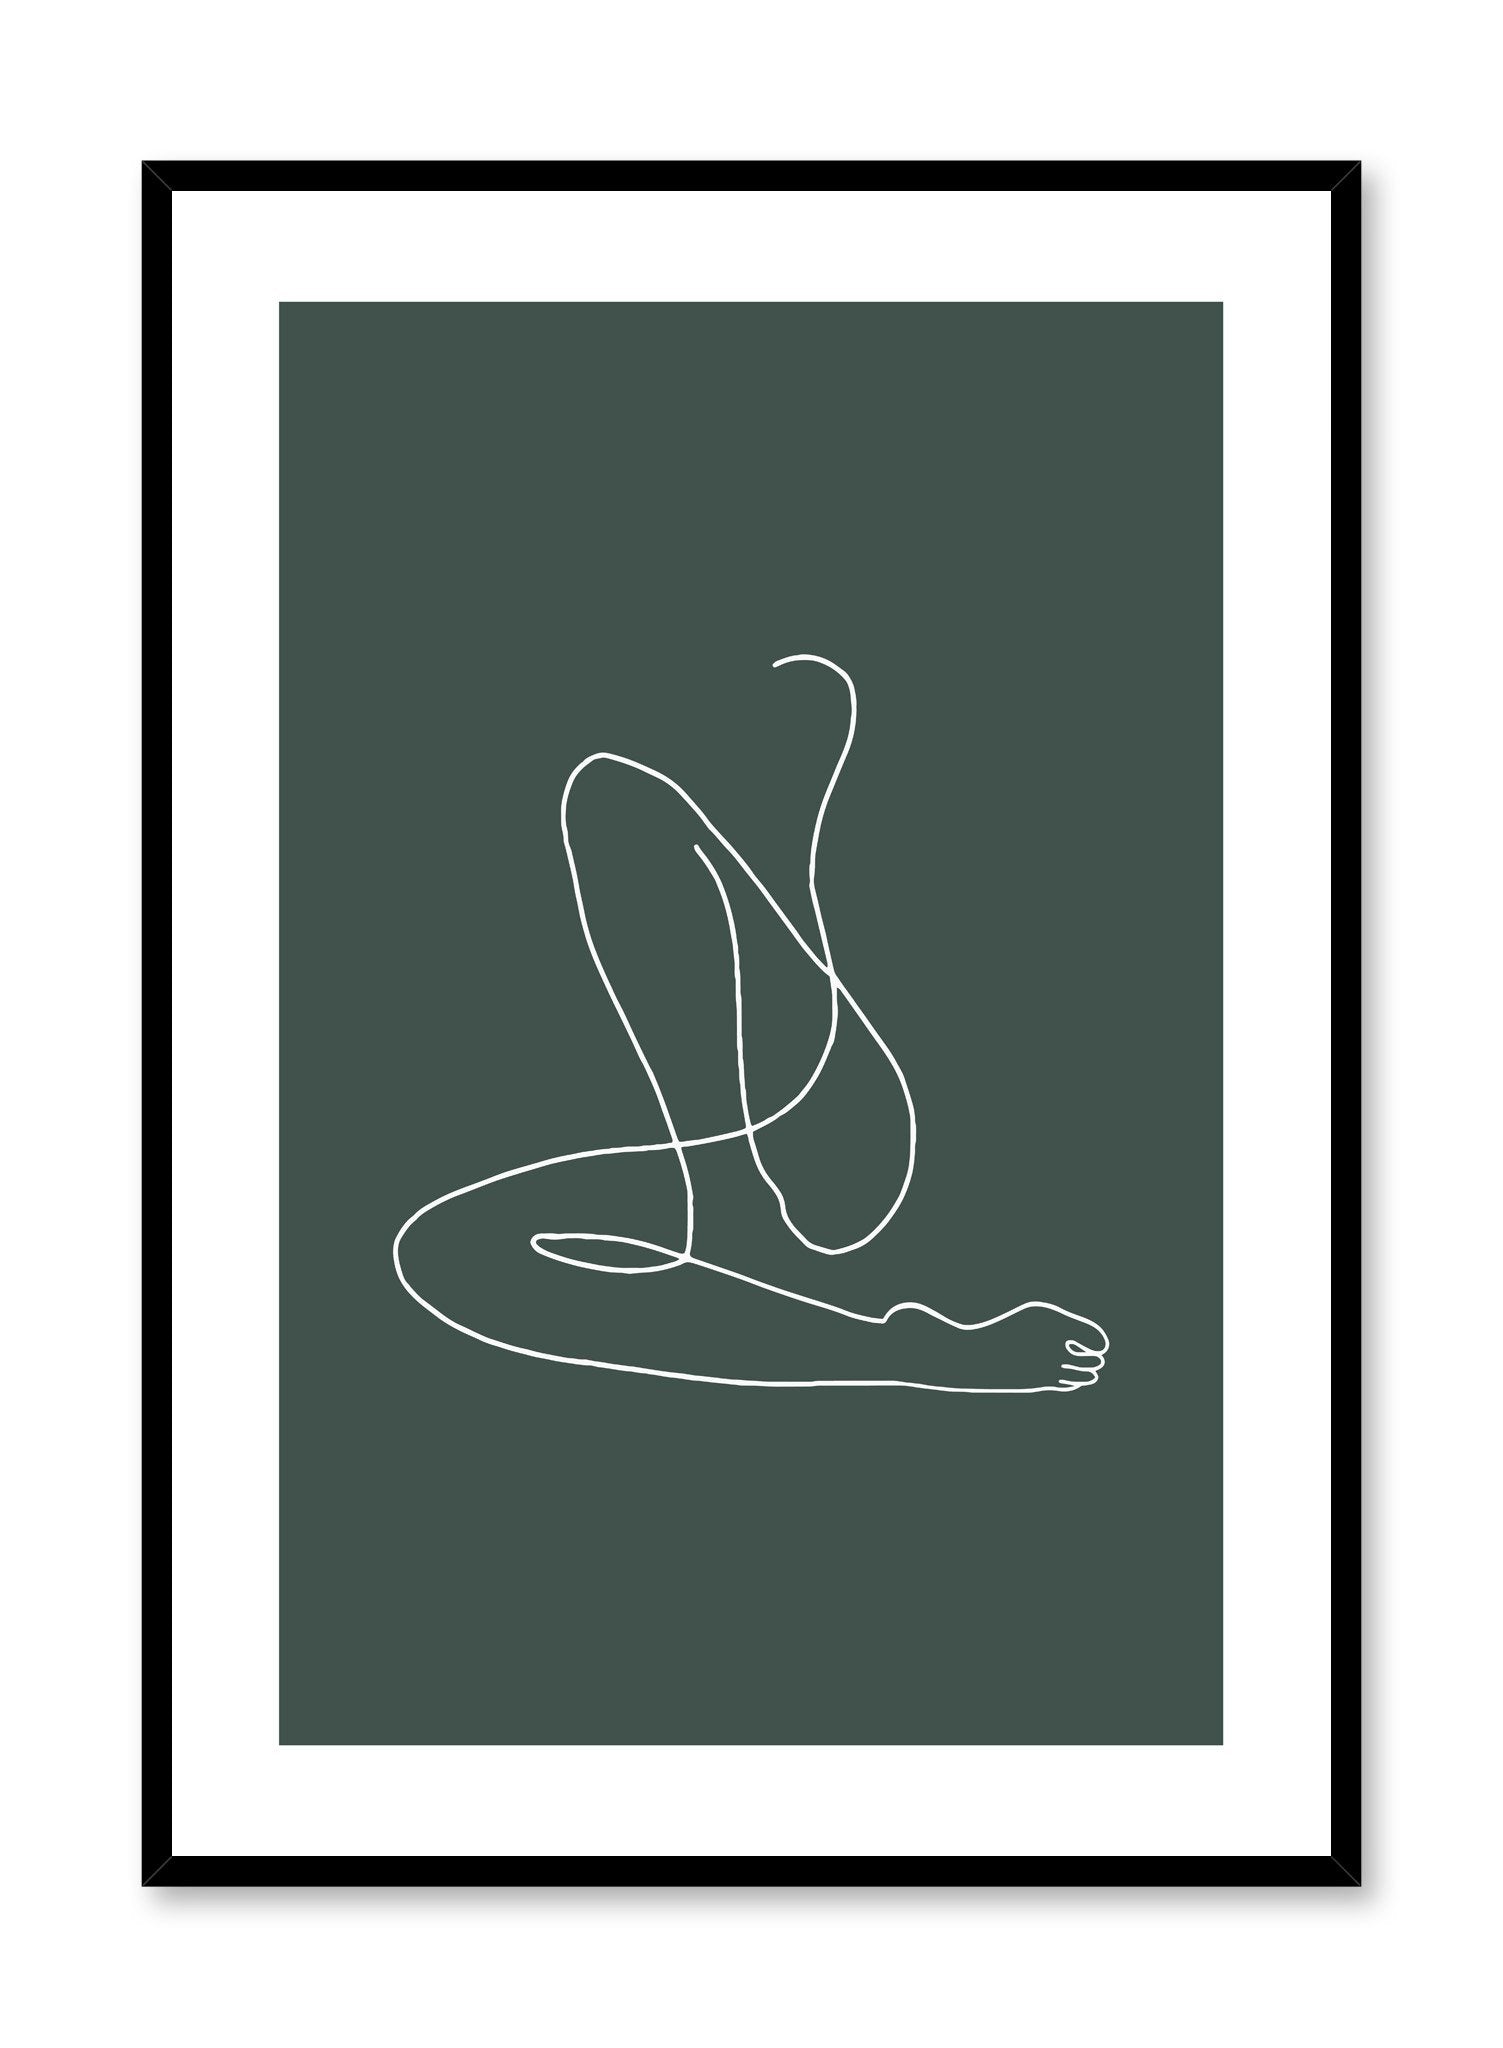 Modern minimalist poster by Opposite Wall with abstract illustration of Flow in green